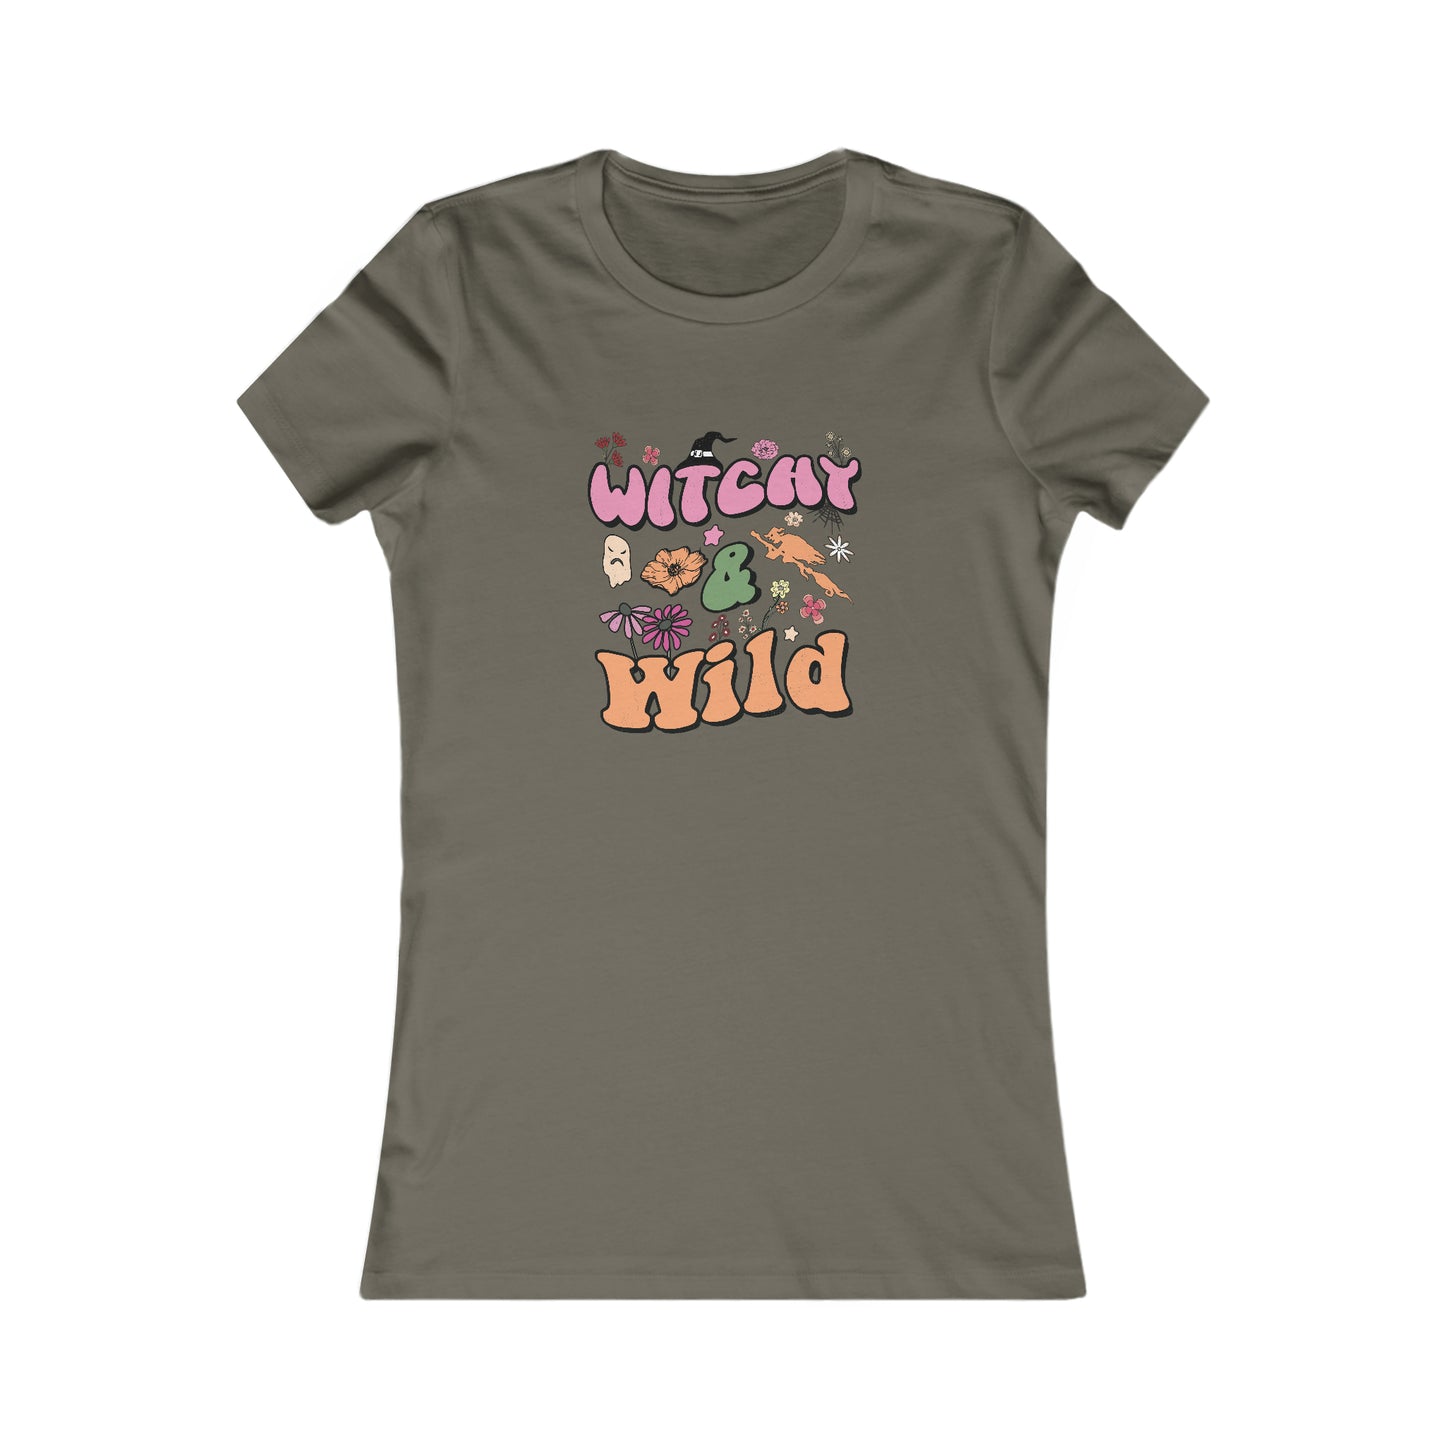 Witchy and Wild Halloween Tee